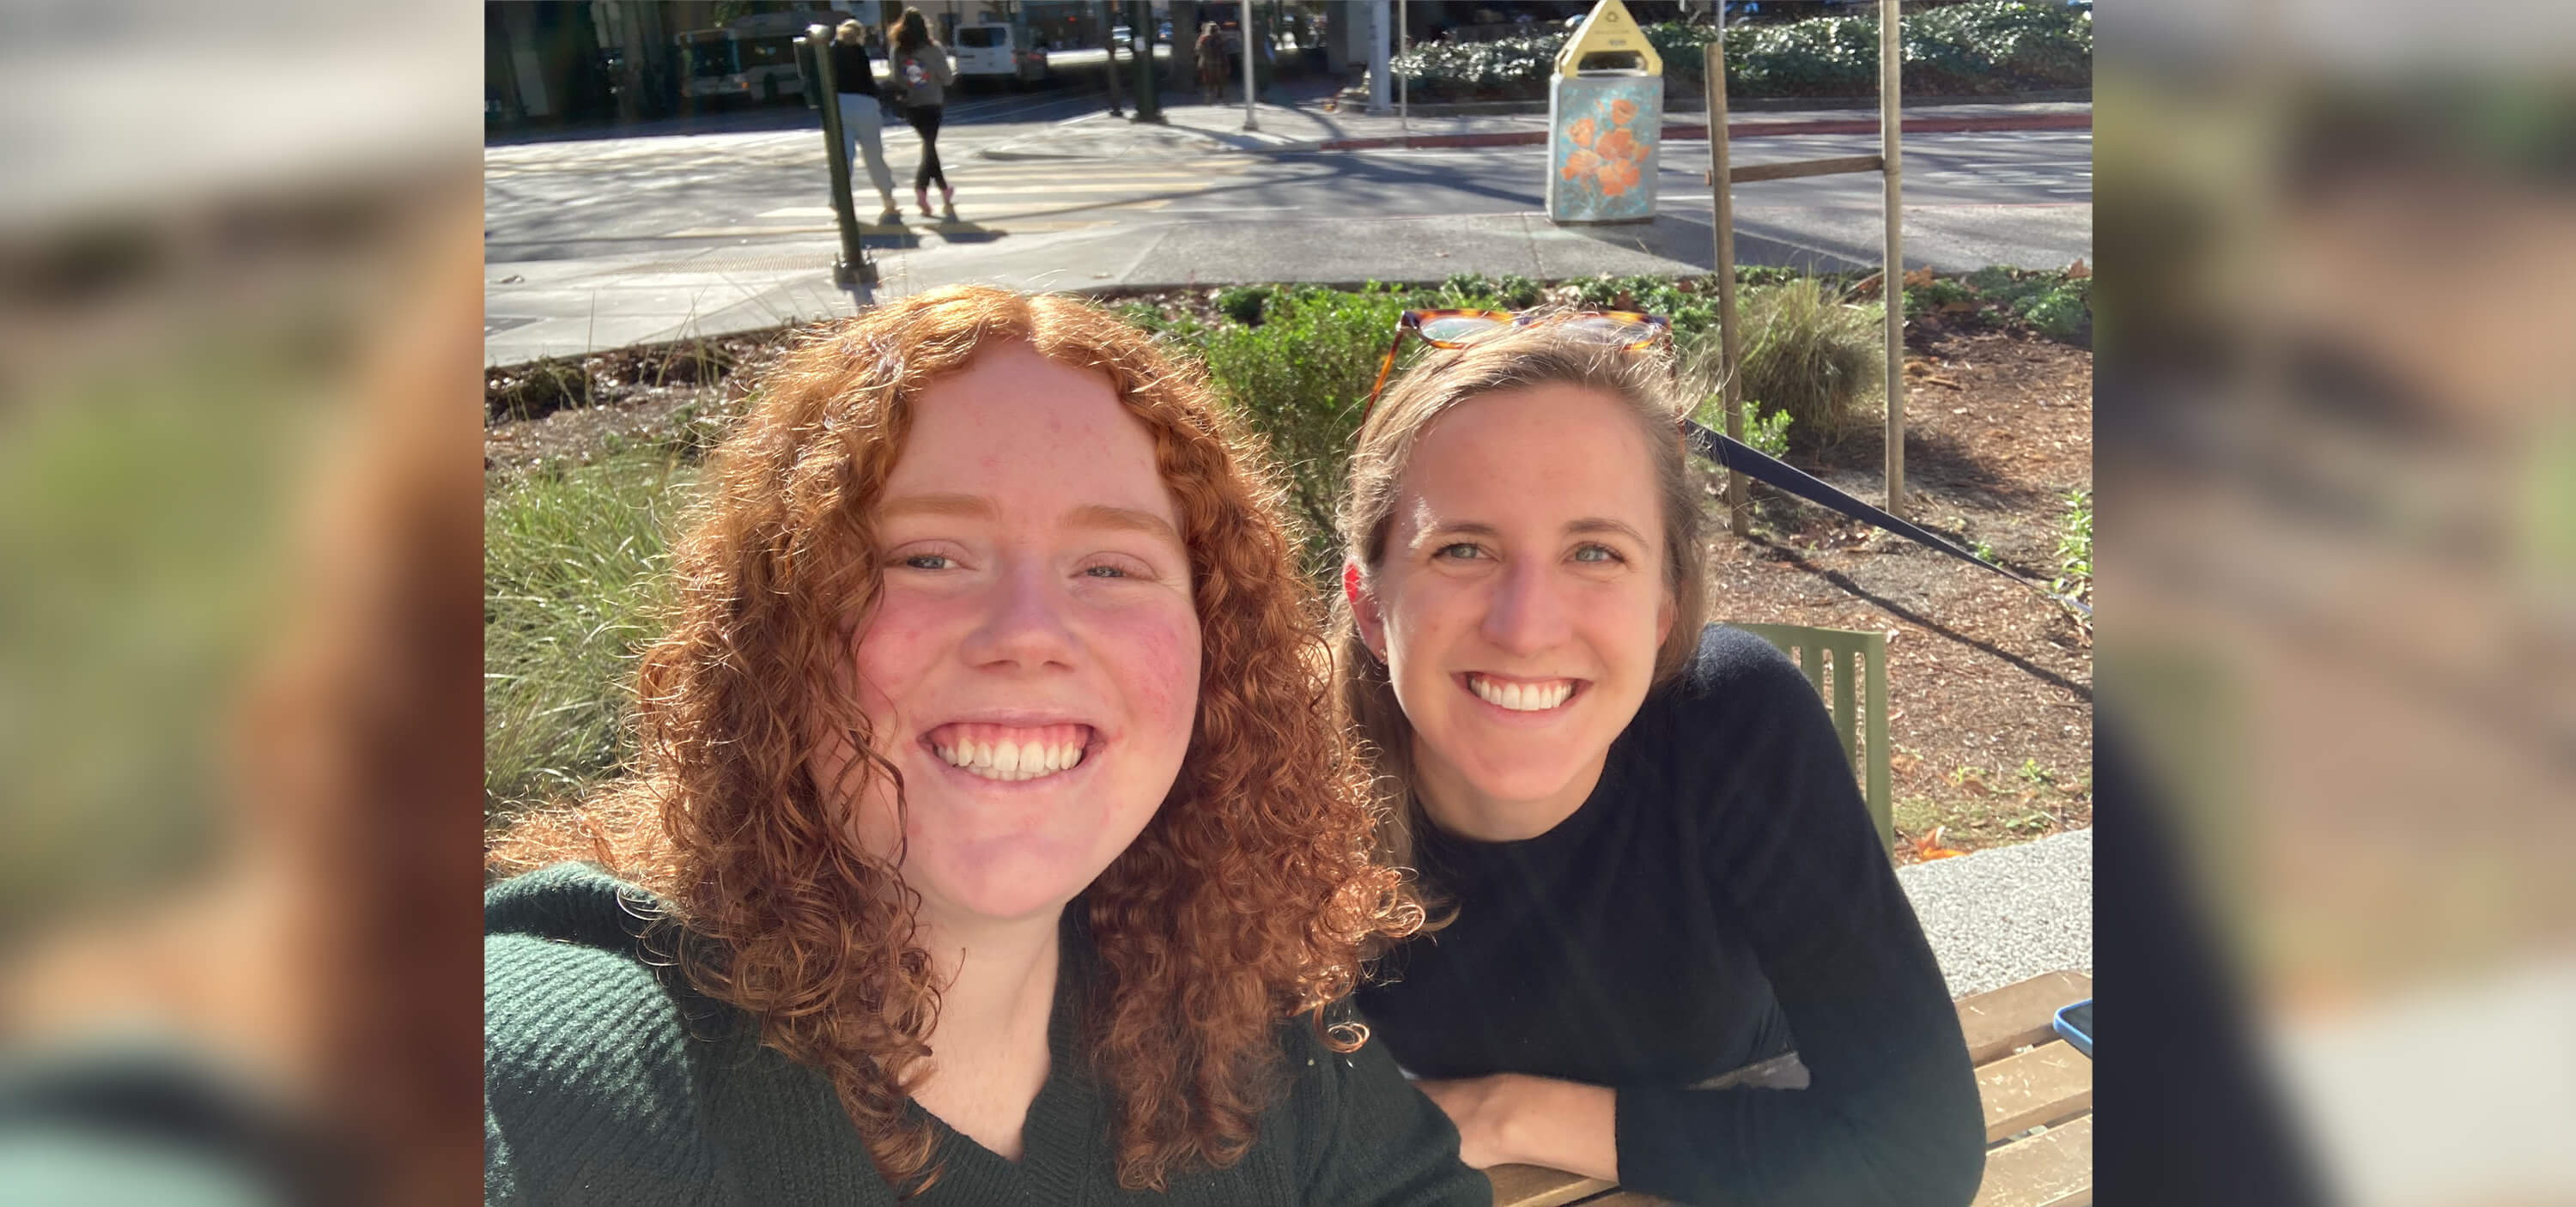 Two women pose for a selfie while sitting outside on a park bench and smiling.